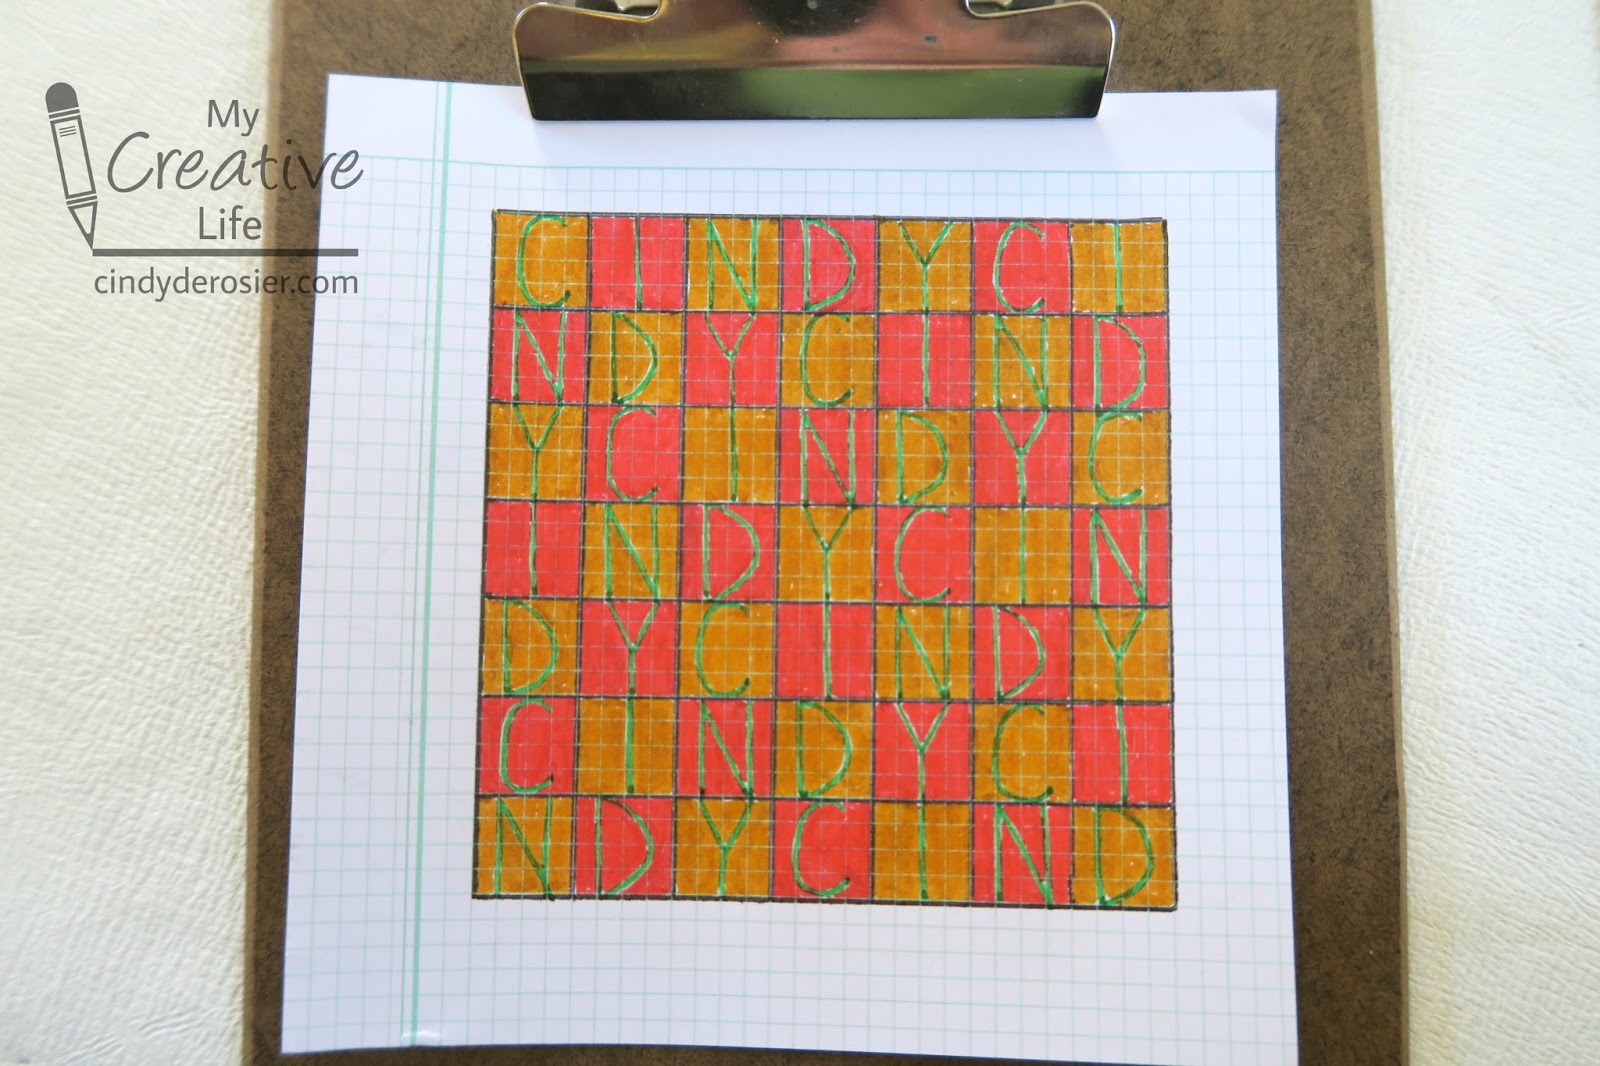 5 Grid Drawing Paper